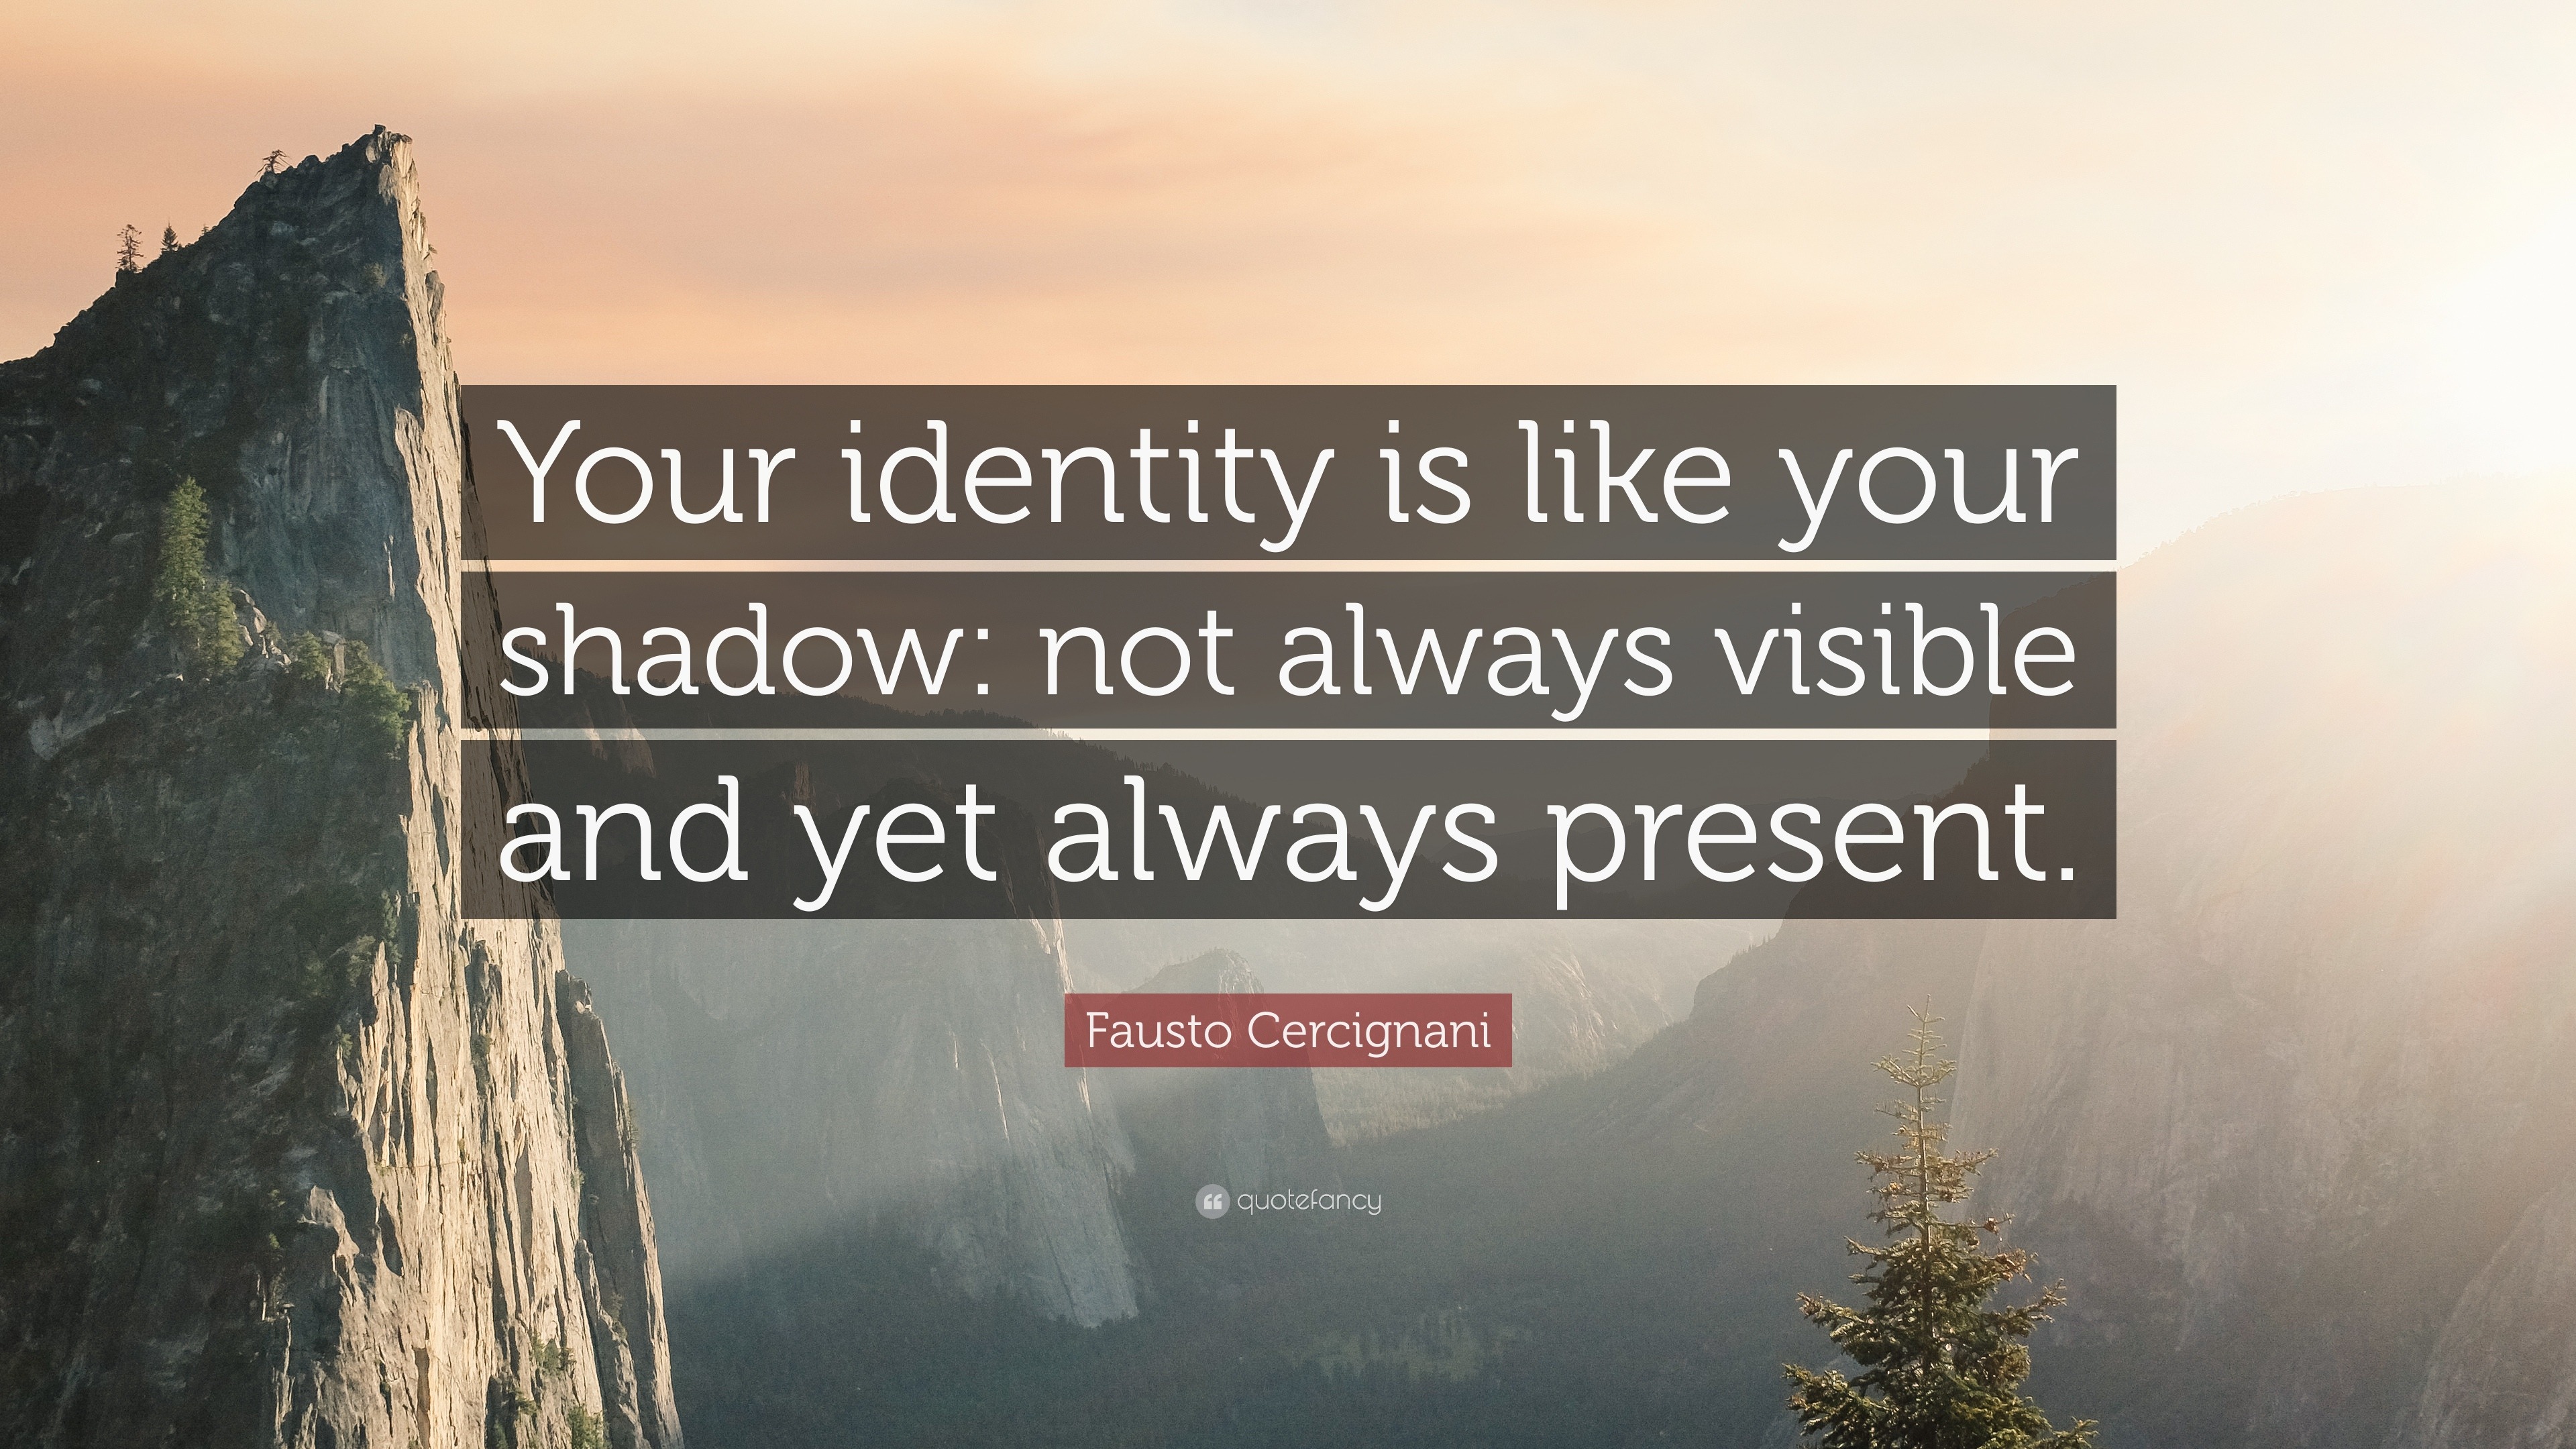 Fausto Cercignani Quote: “Your identity is like your shadow: not always